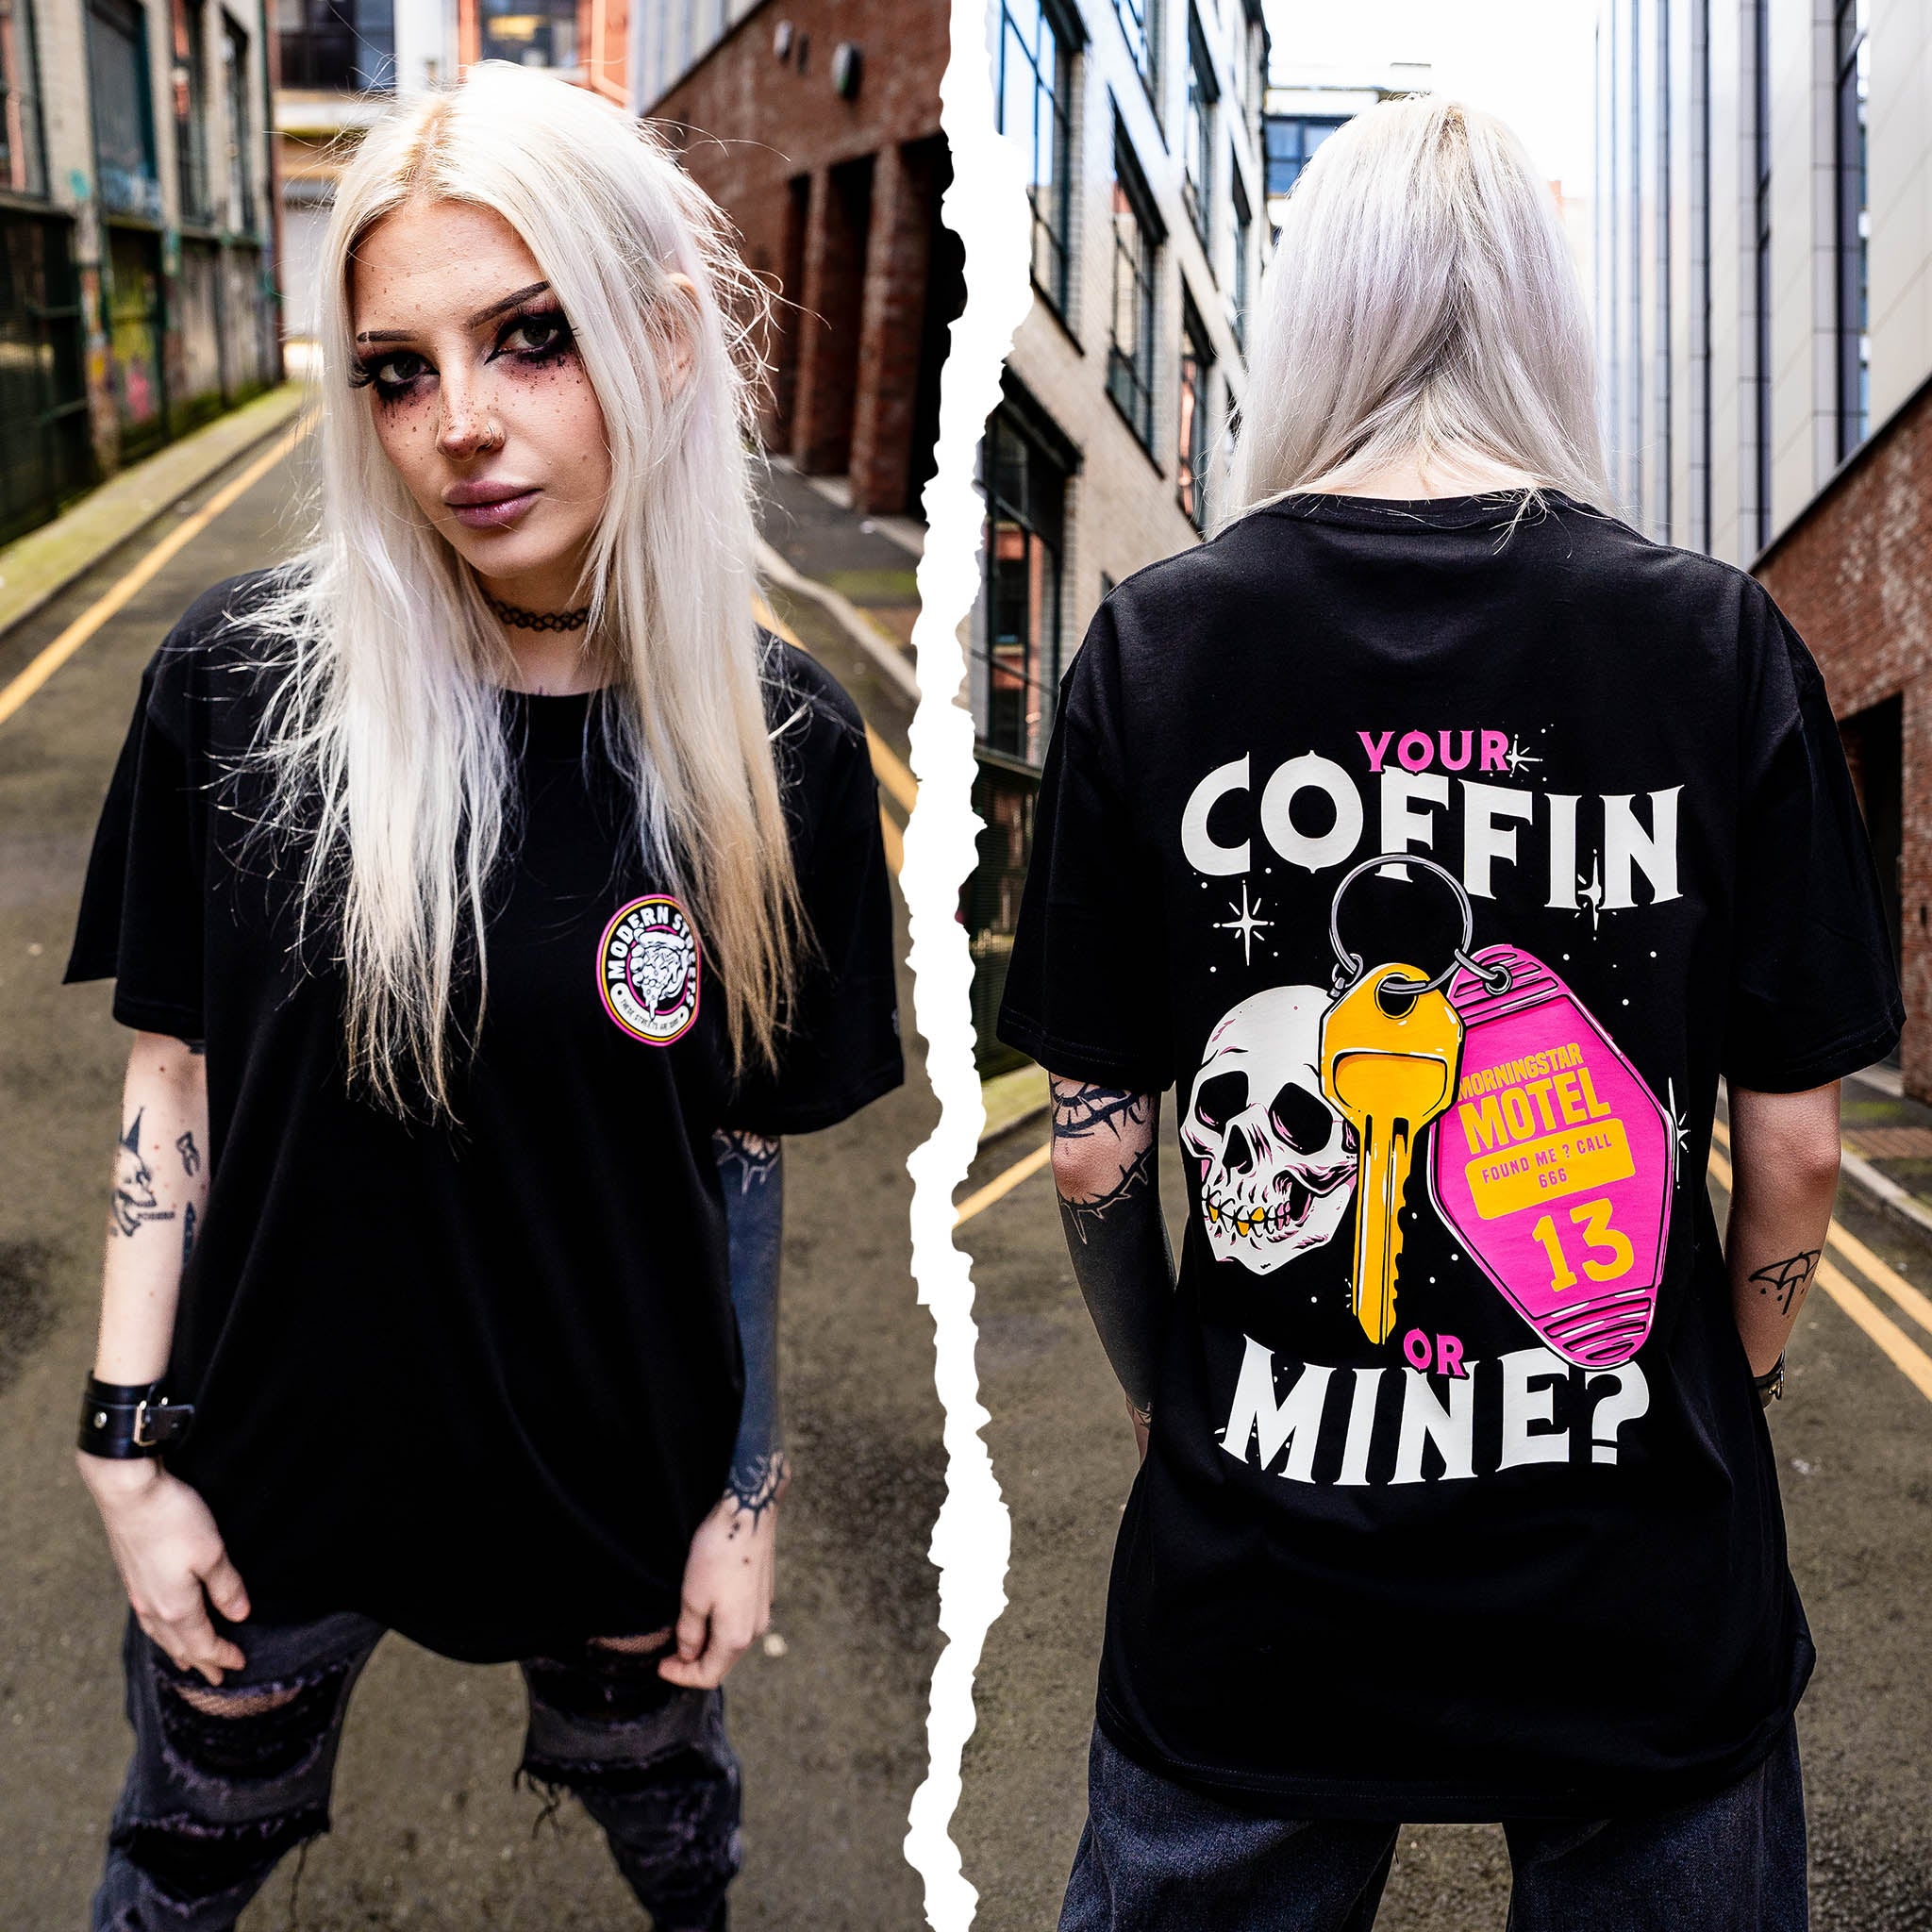 Your Coffin Or Mine? T-Shirt